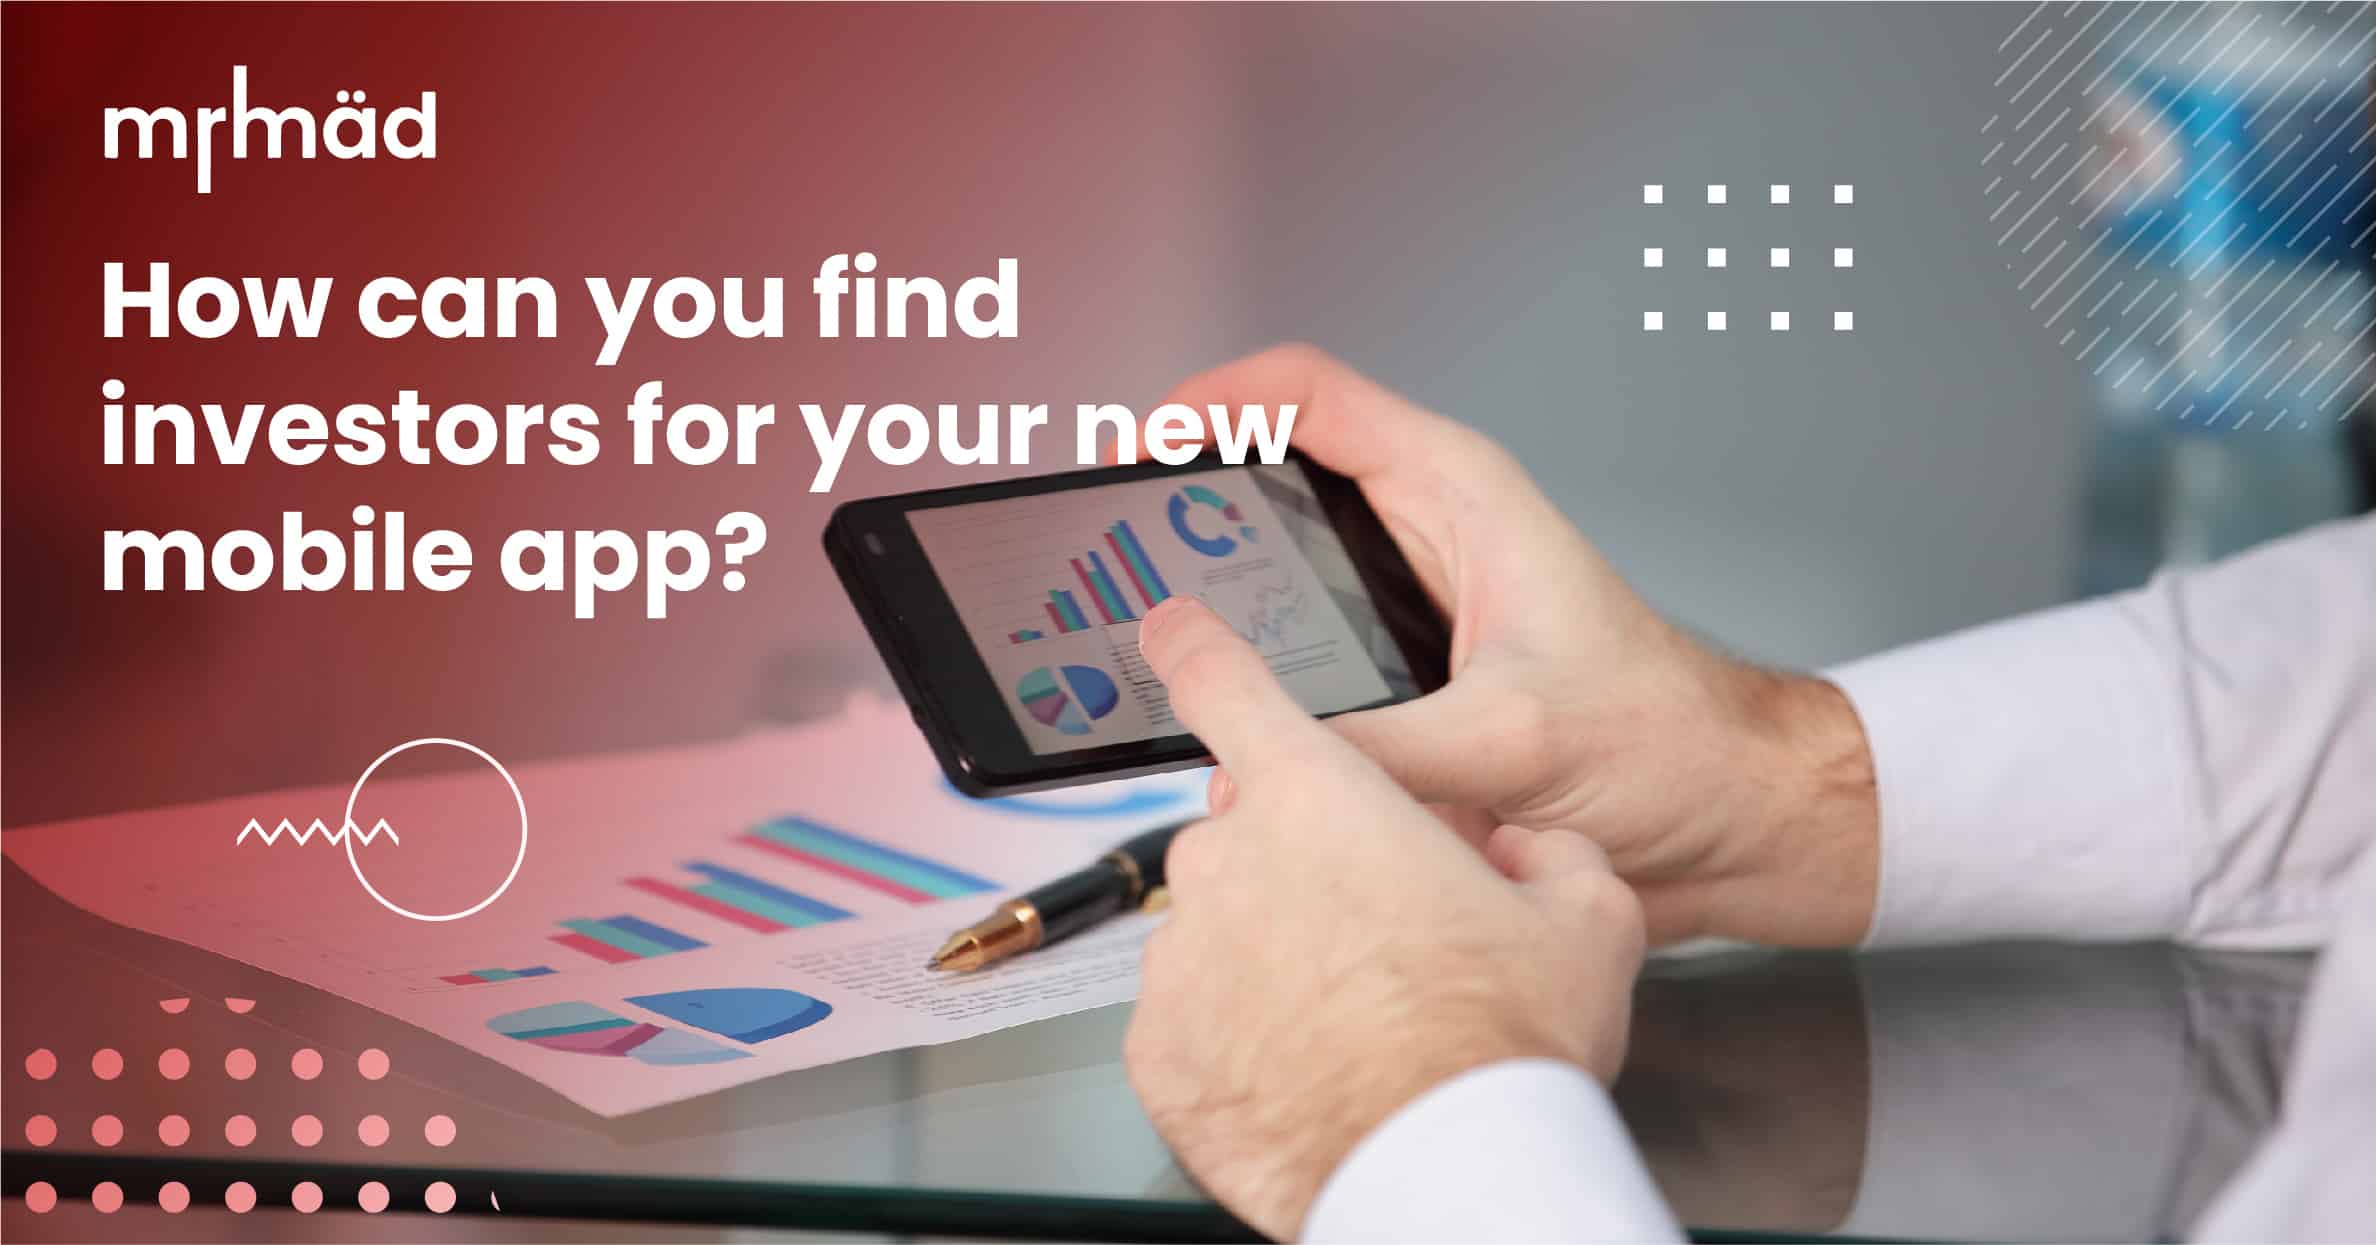 How can you find investors for your new mobile app